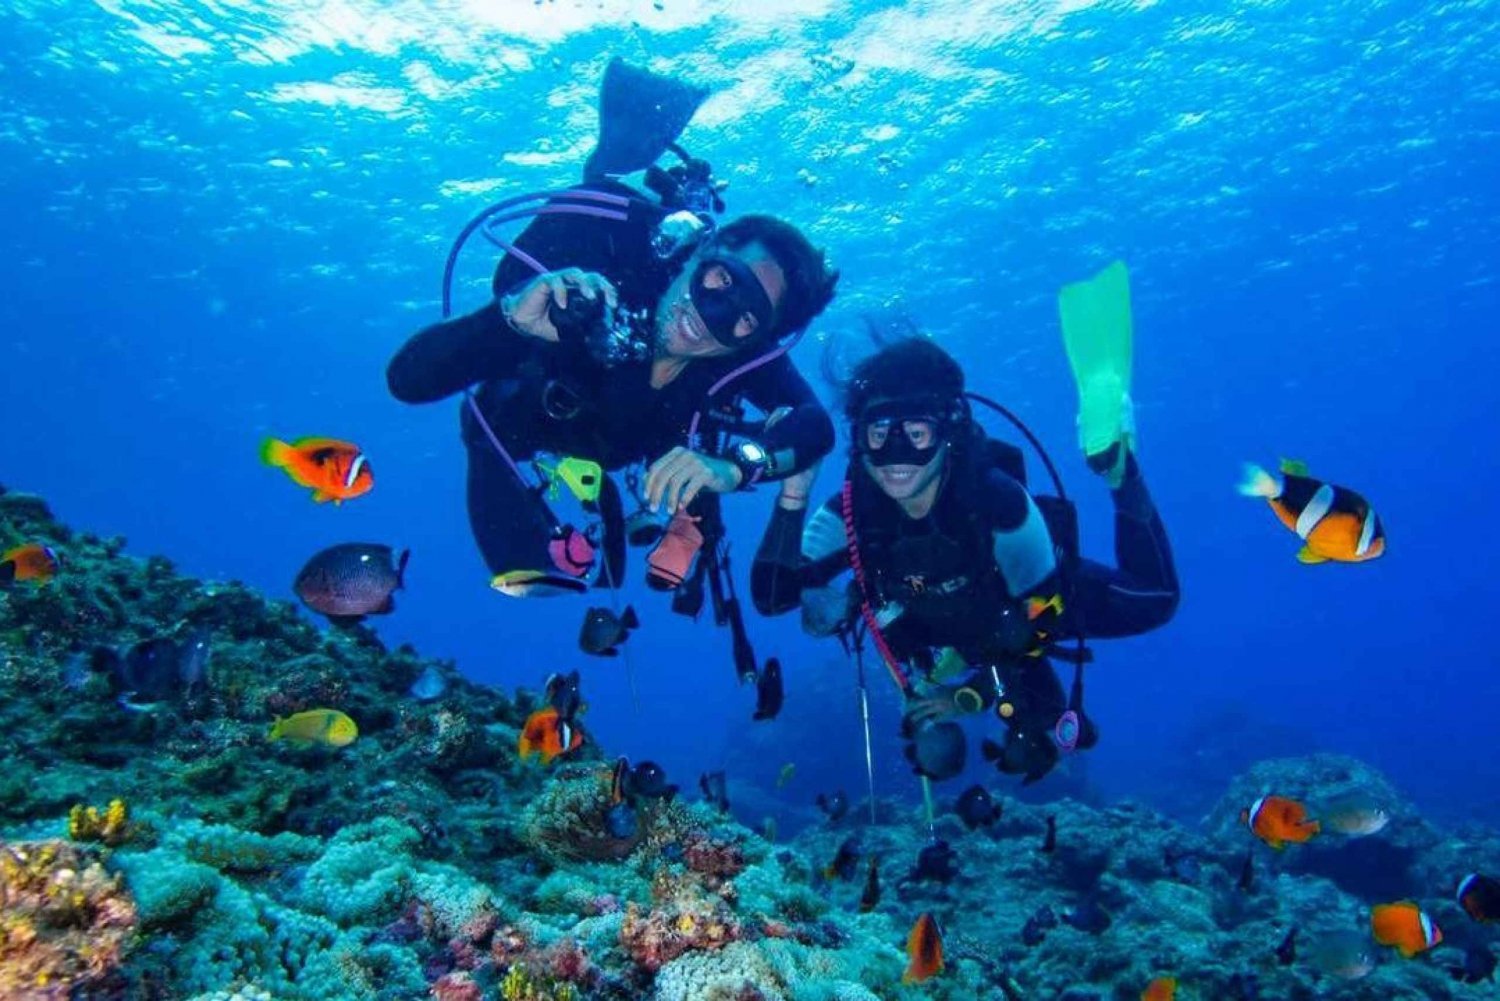 From Bodrum: Scuba Diving in the Aegean Sea